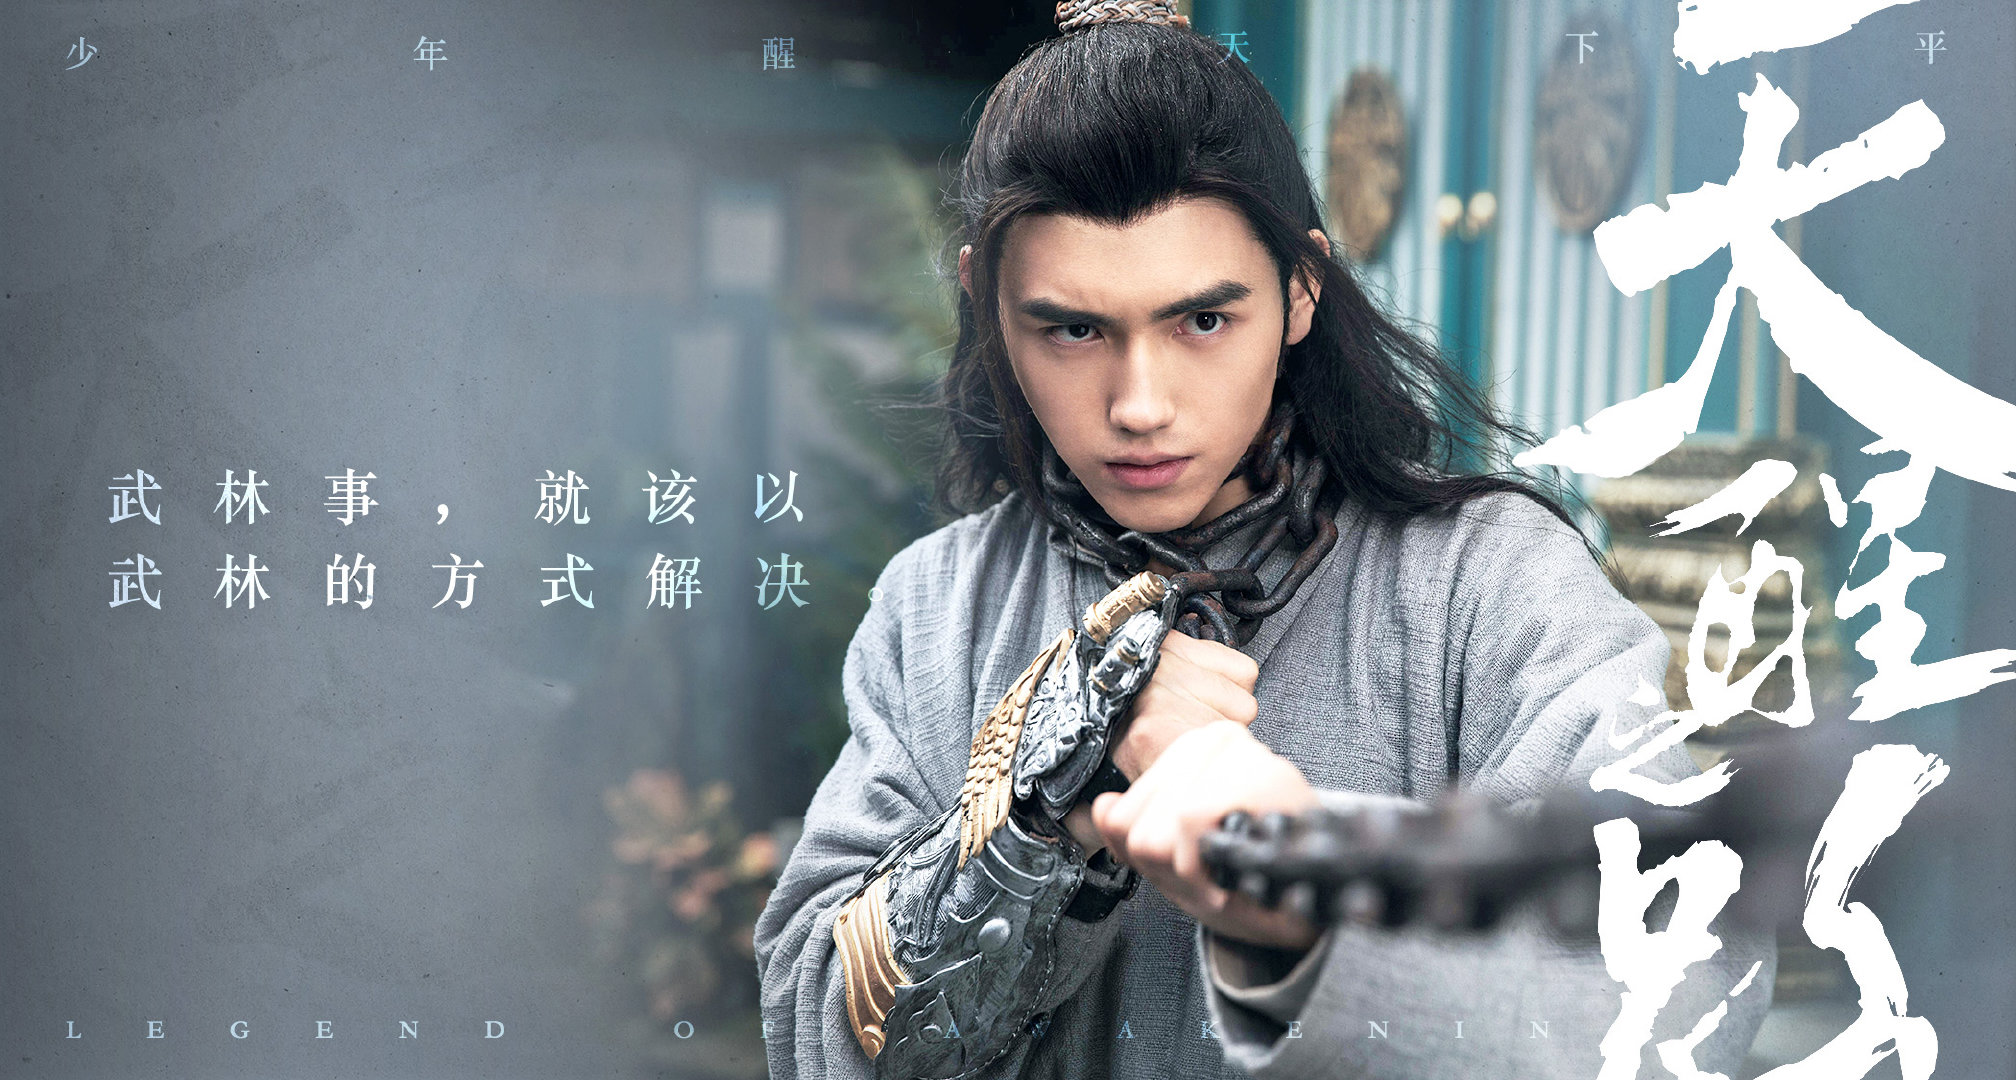 Free download Legend of Awakening releases MV and teasers Cfensi ...